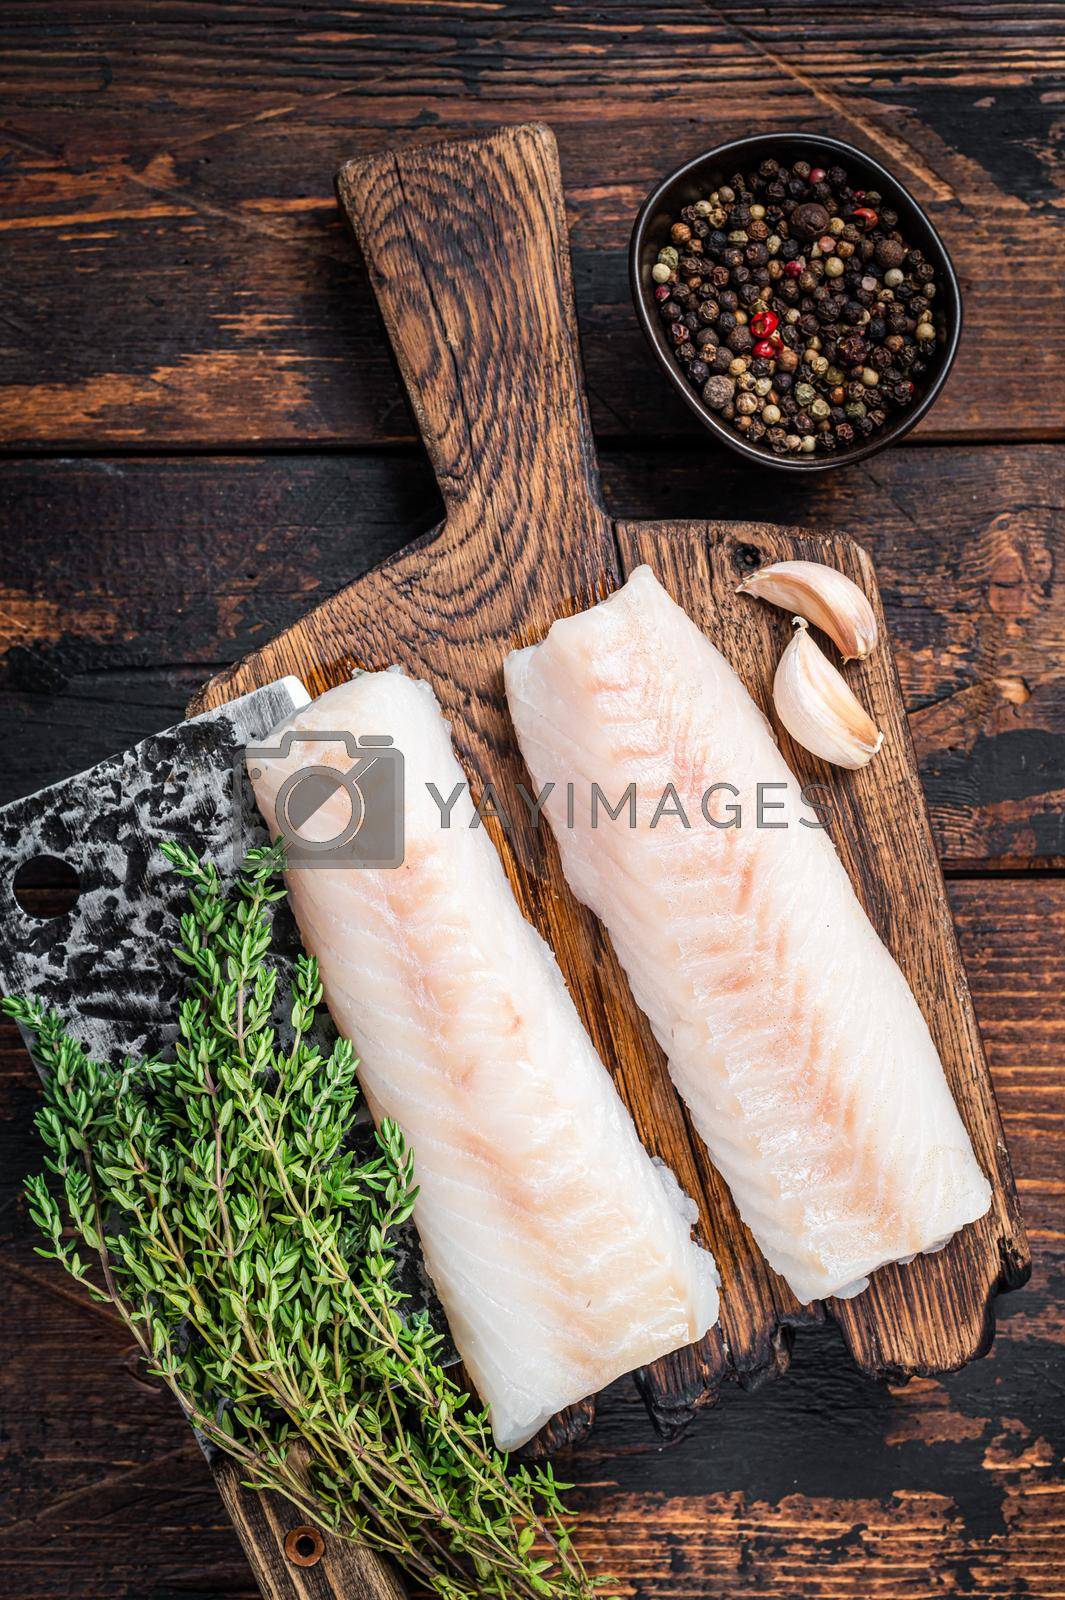 Royalty free image of Raw cod loin fillet steak on wooden board with butcher cleaver. Dark wooden background. Top view by Composter